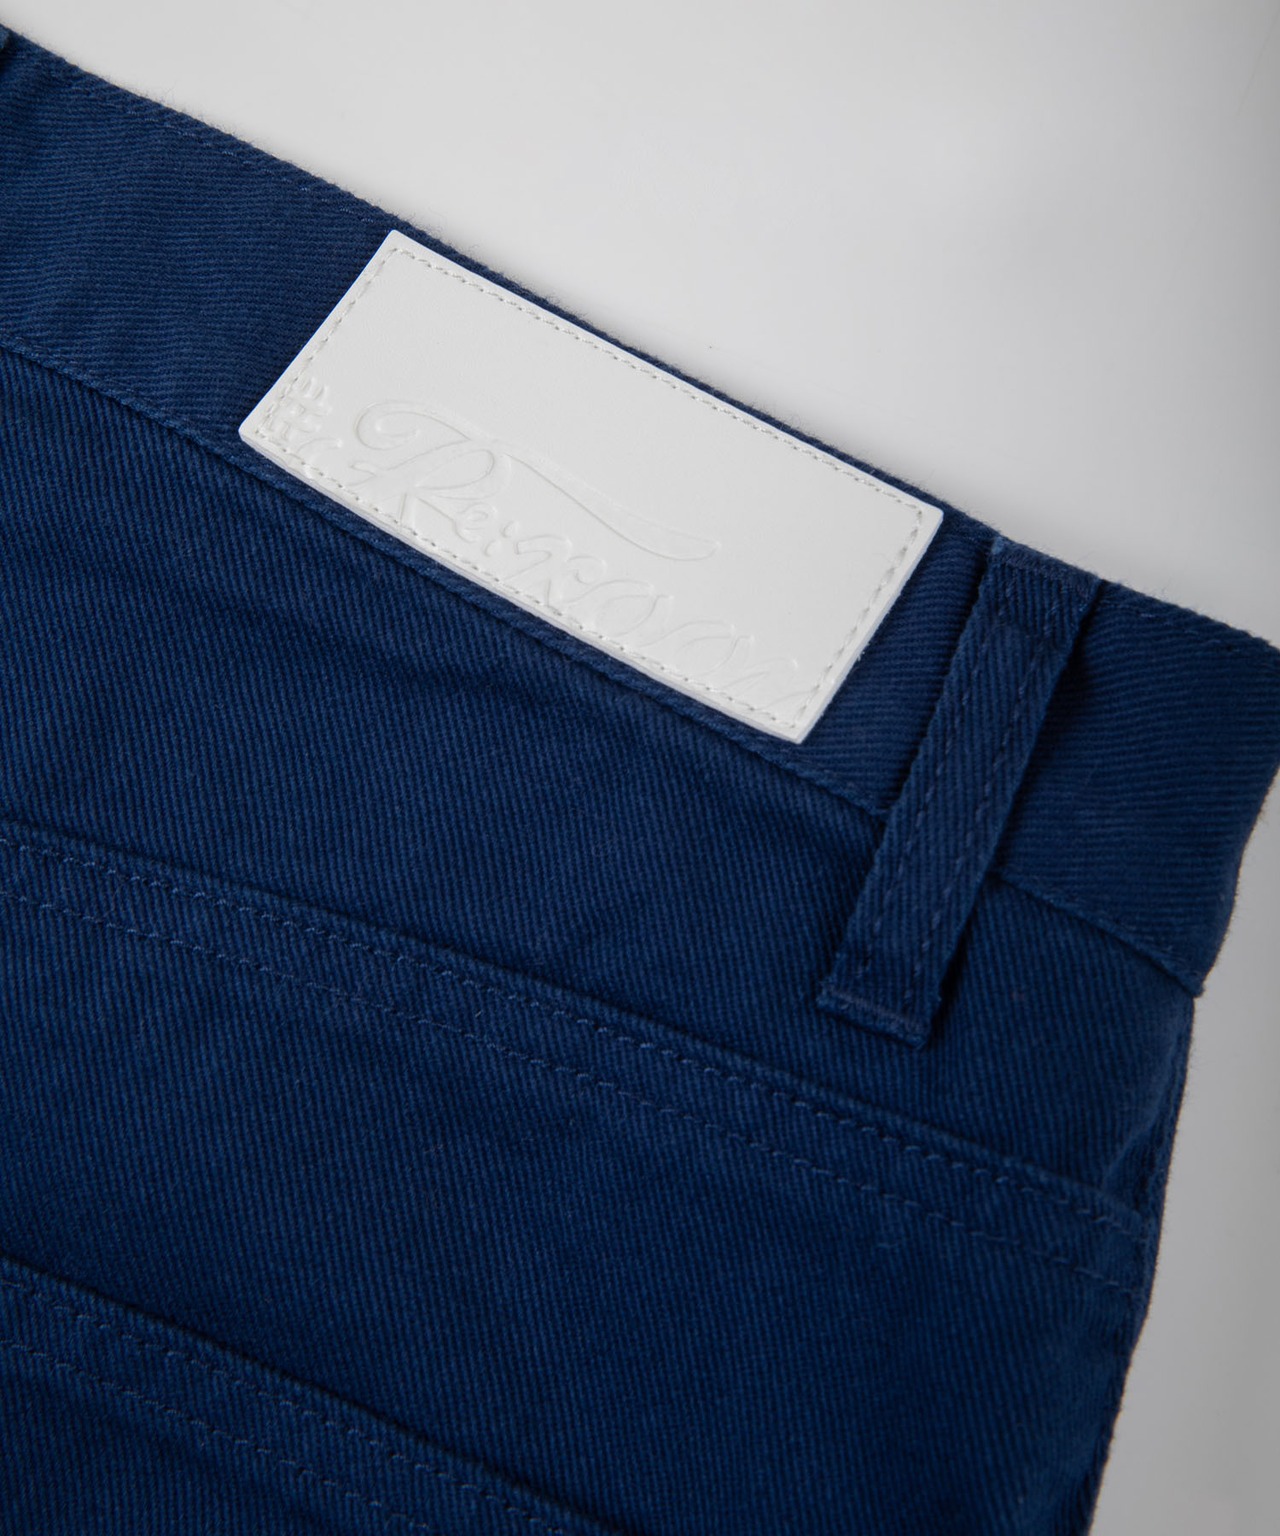 【#Re:room】COLOR CHINO PAINTER WIDE PANTS［REP217］